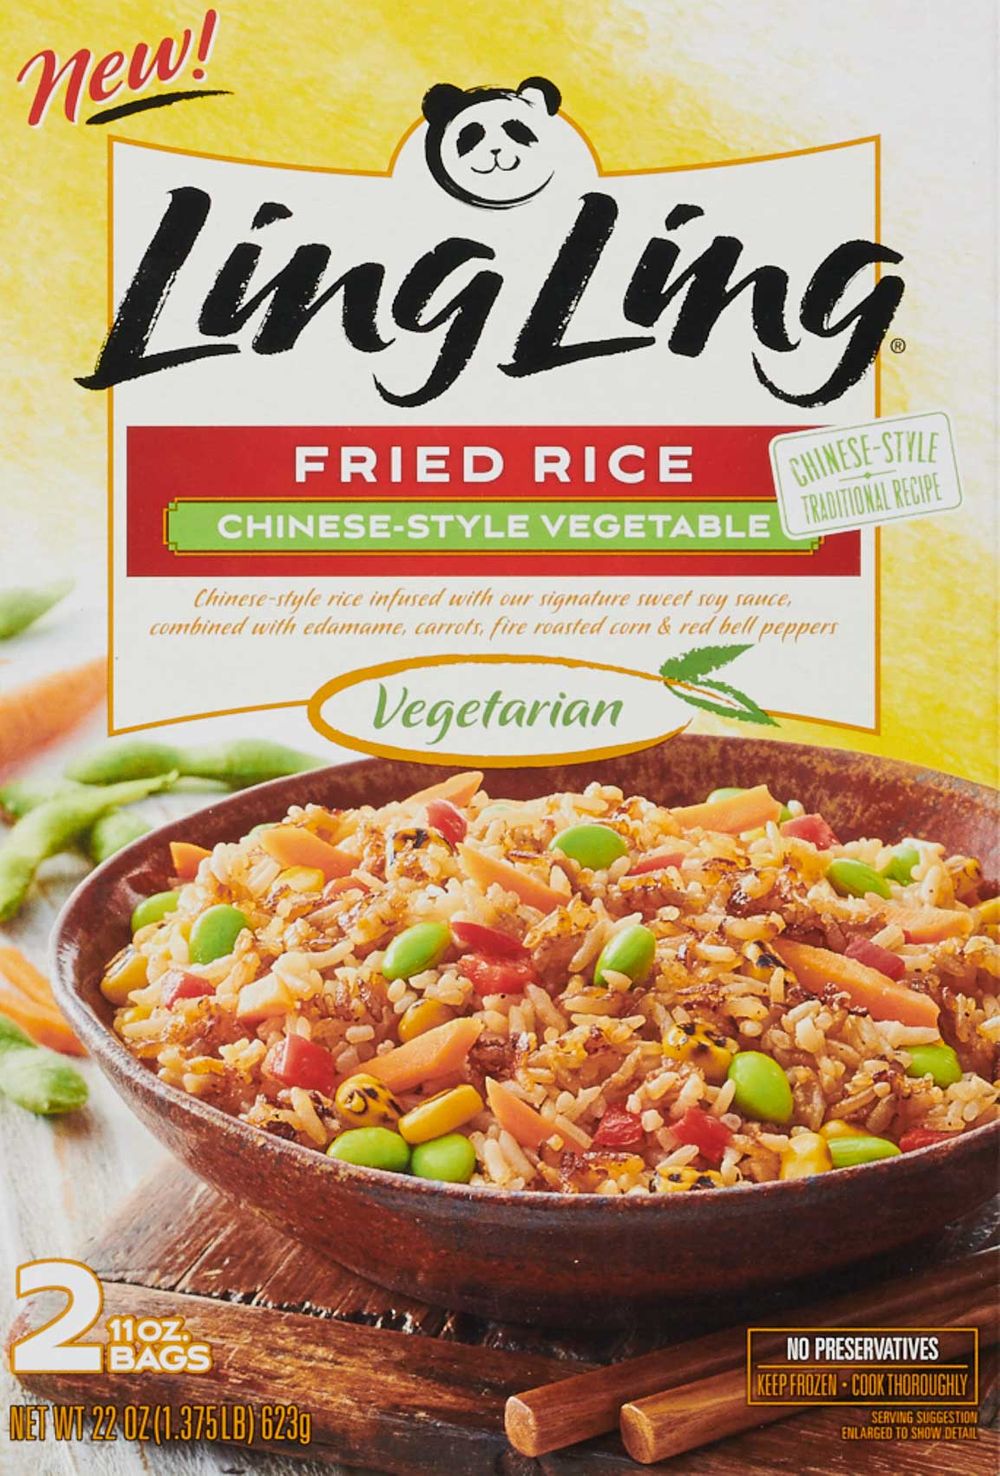 Ling Ling vegetarian Chinese style fried rice